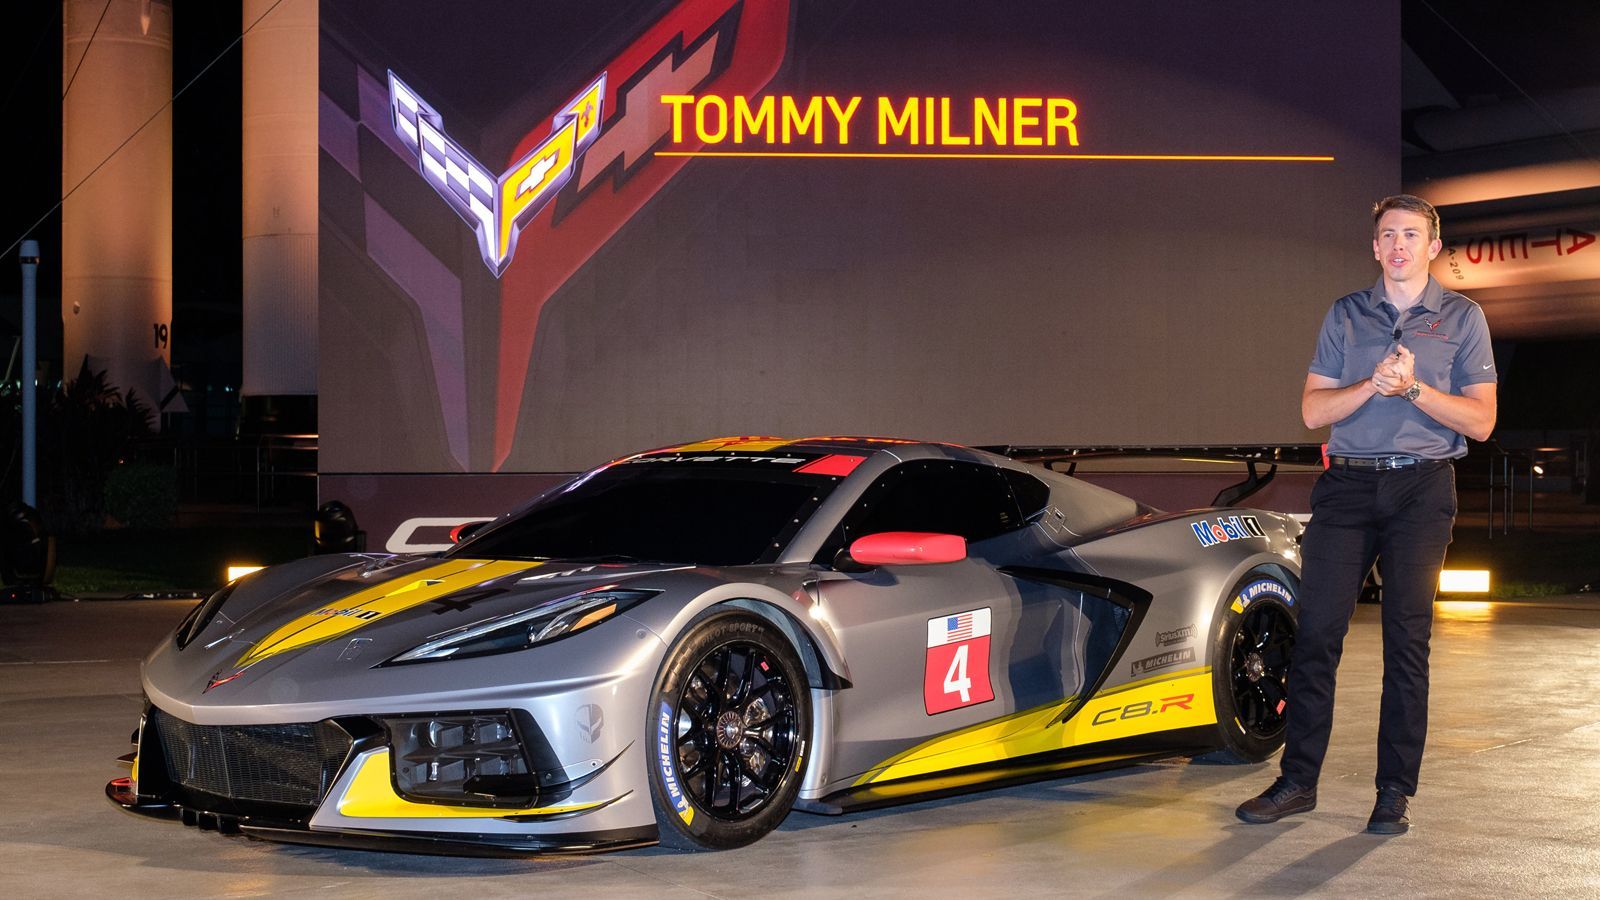 First look: Chevrolet Corvette C8.R makes unexpected appearance at Kennedy Space Center